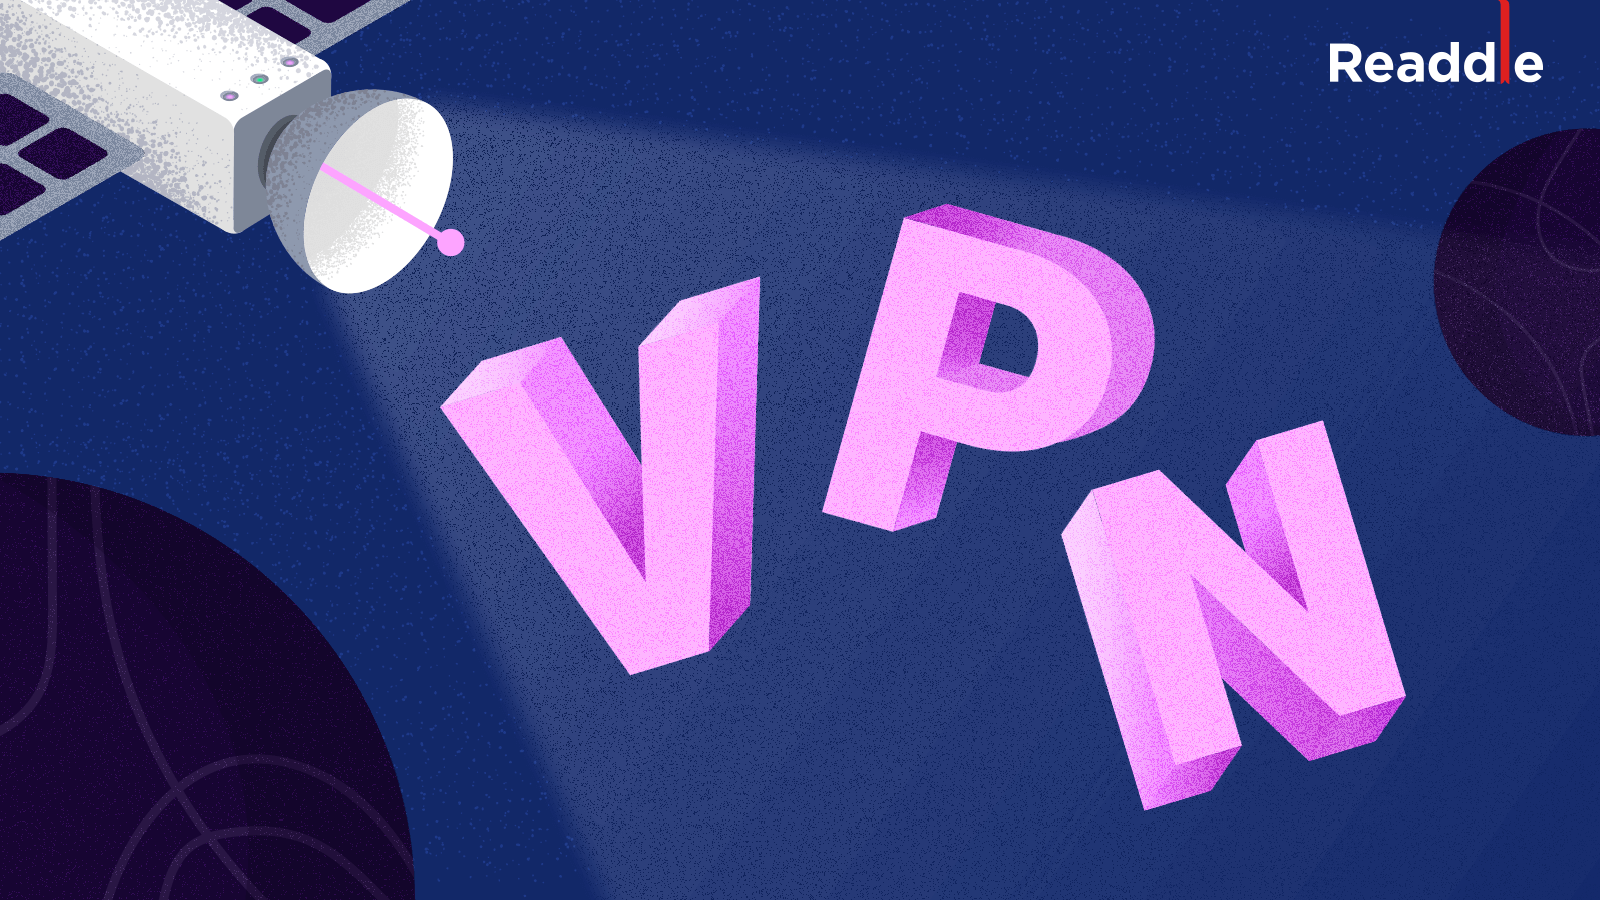 what does vpn on cell phone mean